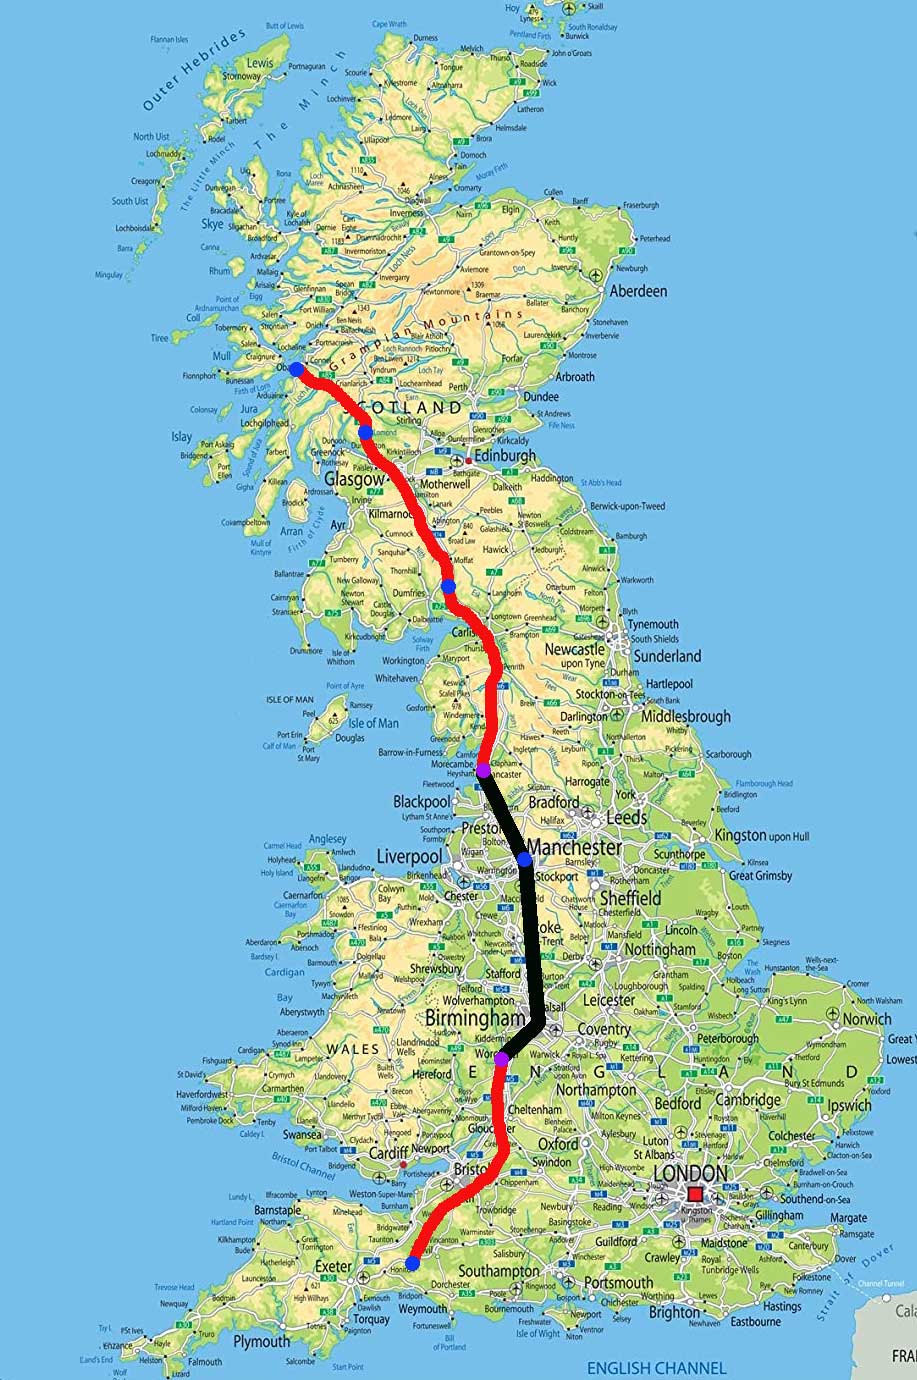 Somerset to Scotland on a bicycle